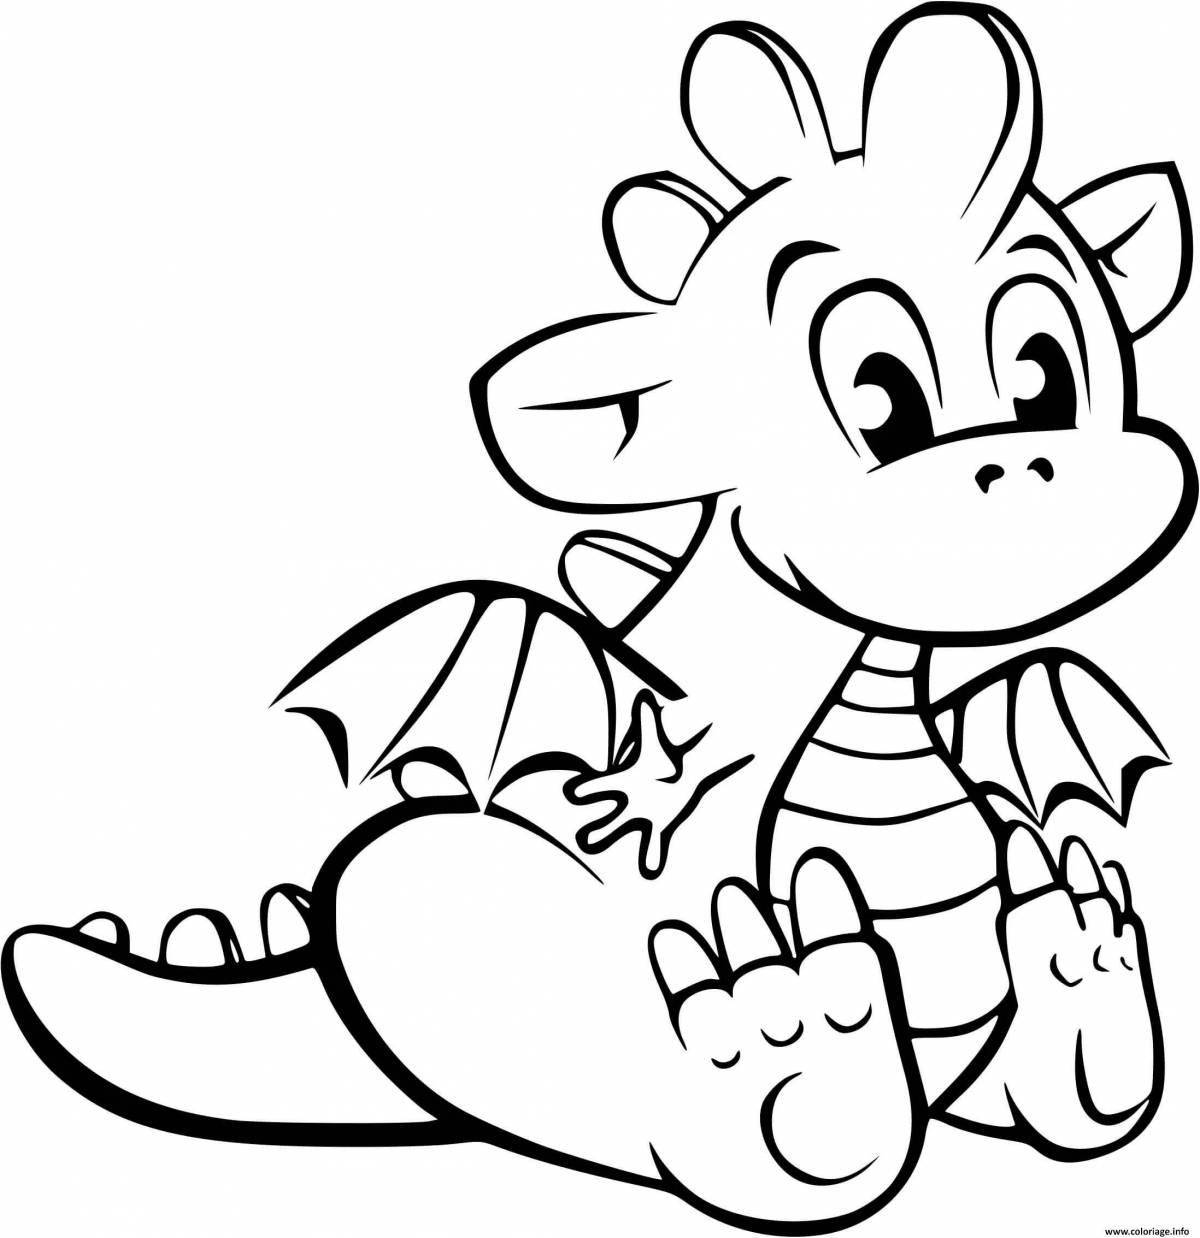 Intricate dragon coloring pages for kids